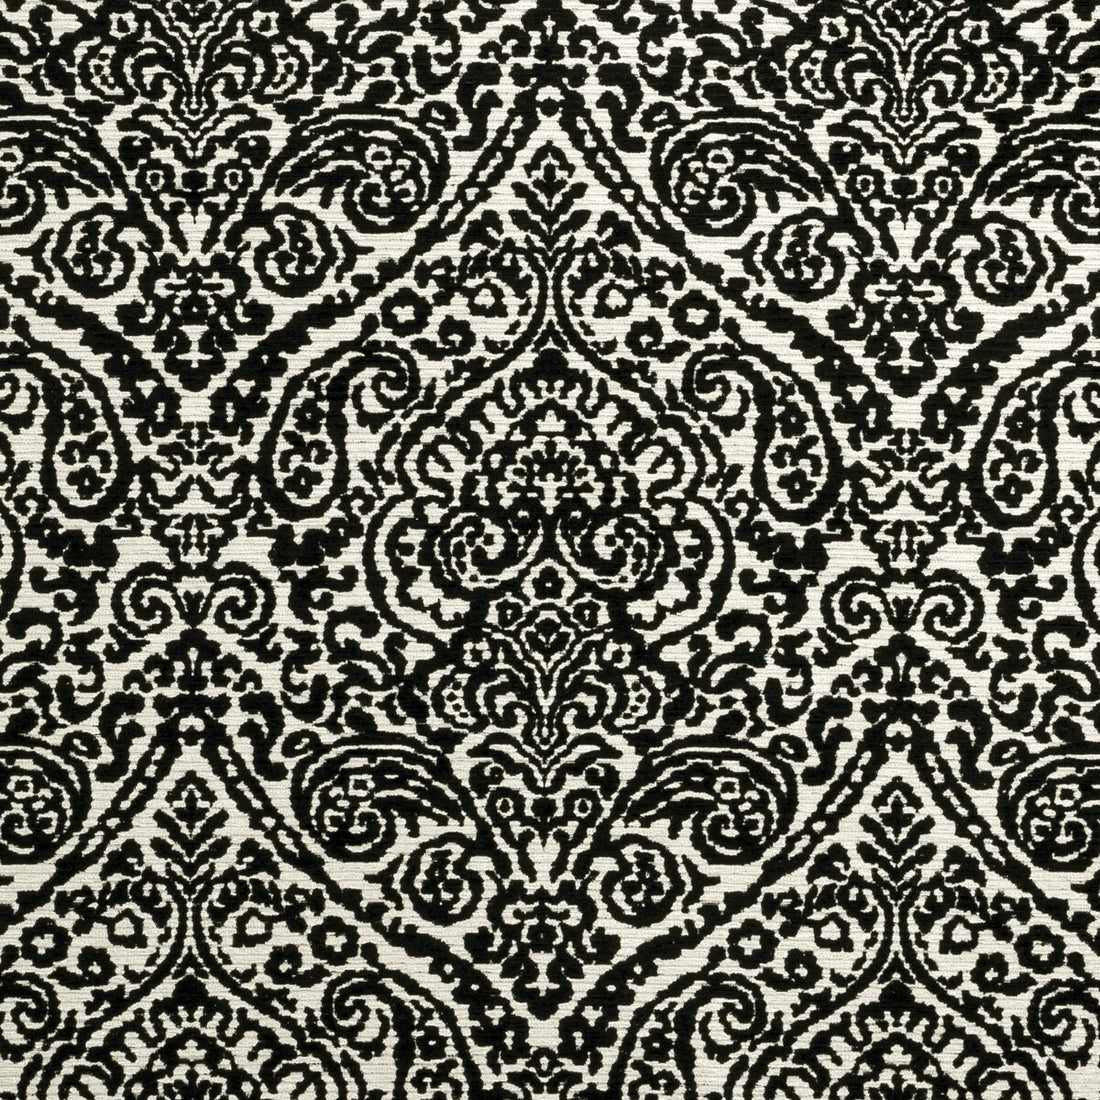 Bw1023 fabric in black/white color - pattern F0896/01.CAC.0 - by Clarke And Clarke in the Clarke &amp; Clarke Black + White collection